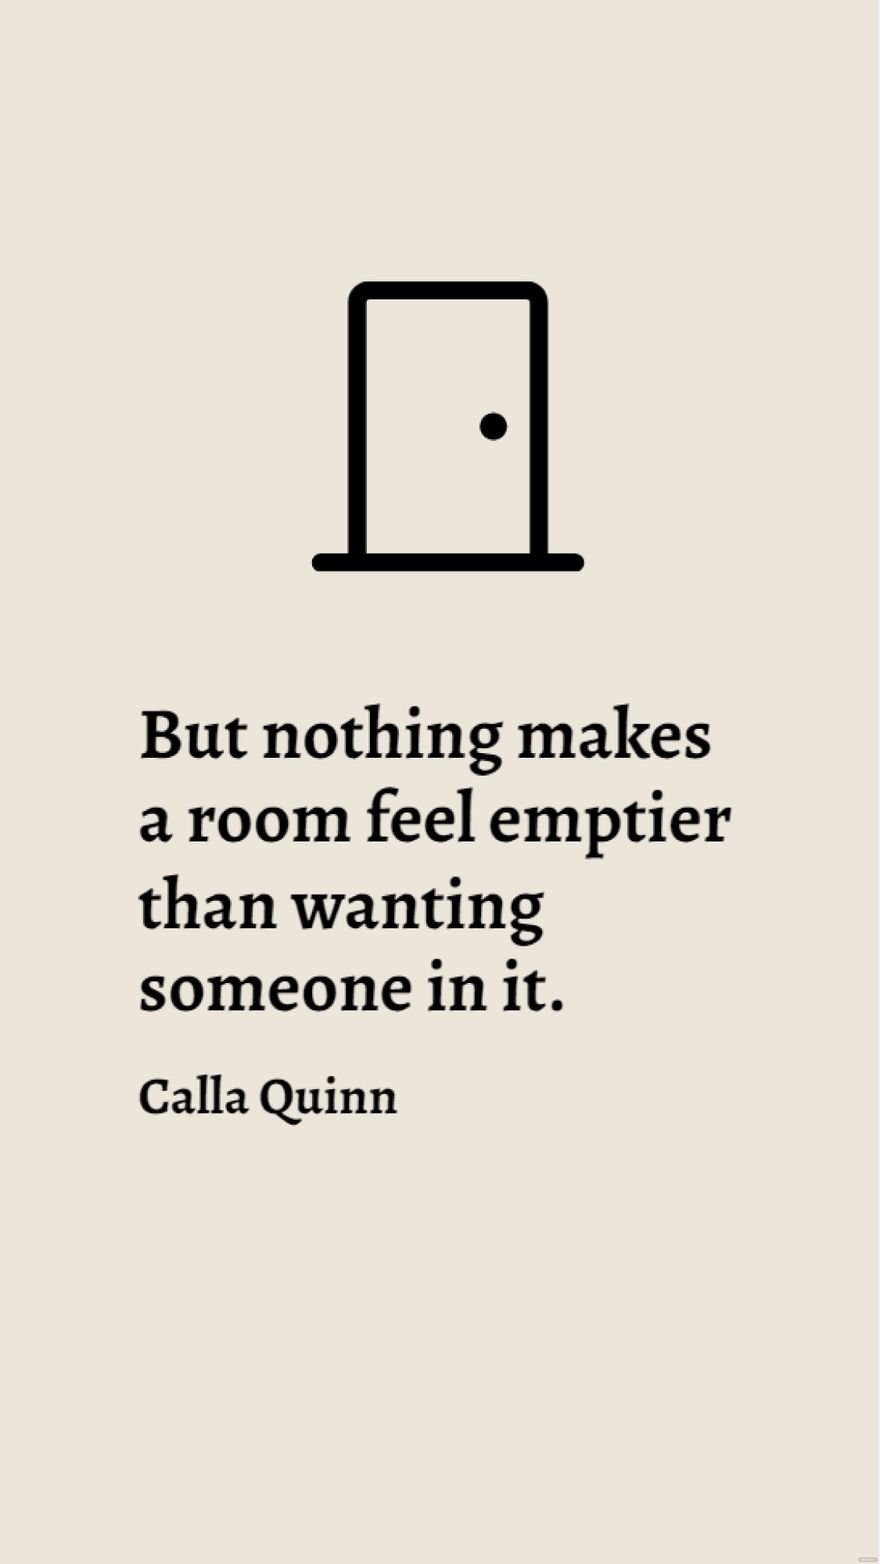 Calla Quinn - But nothing makes a room feel emptier than wanting someone in it.